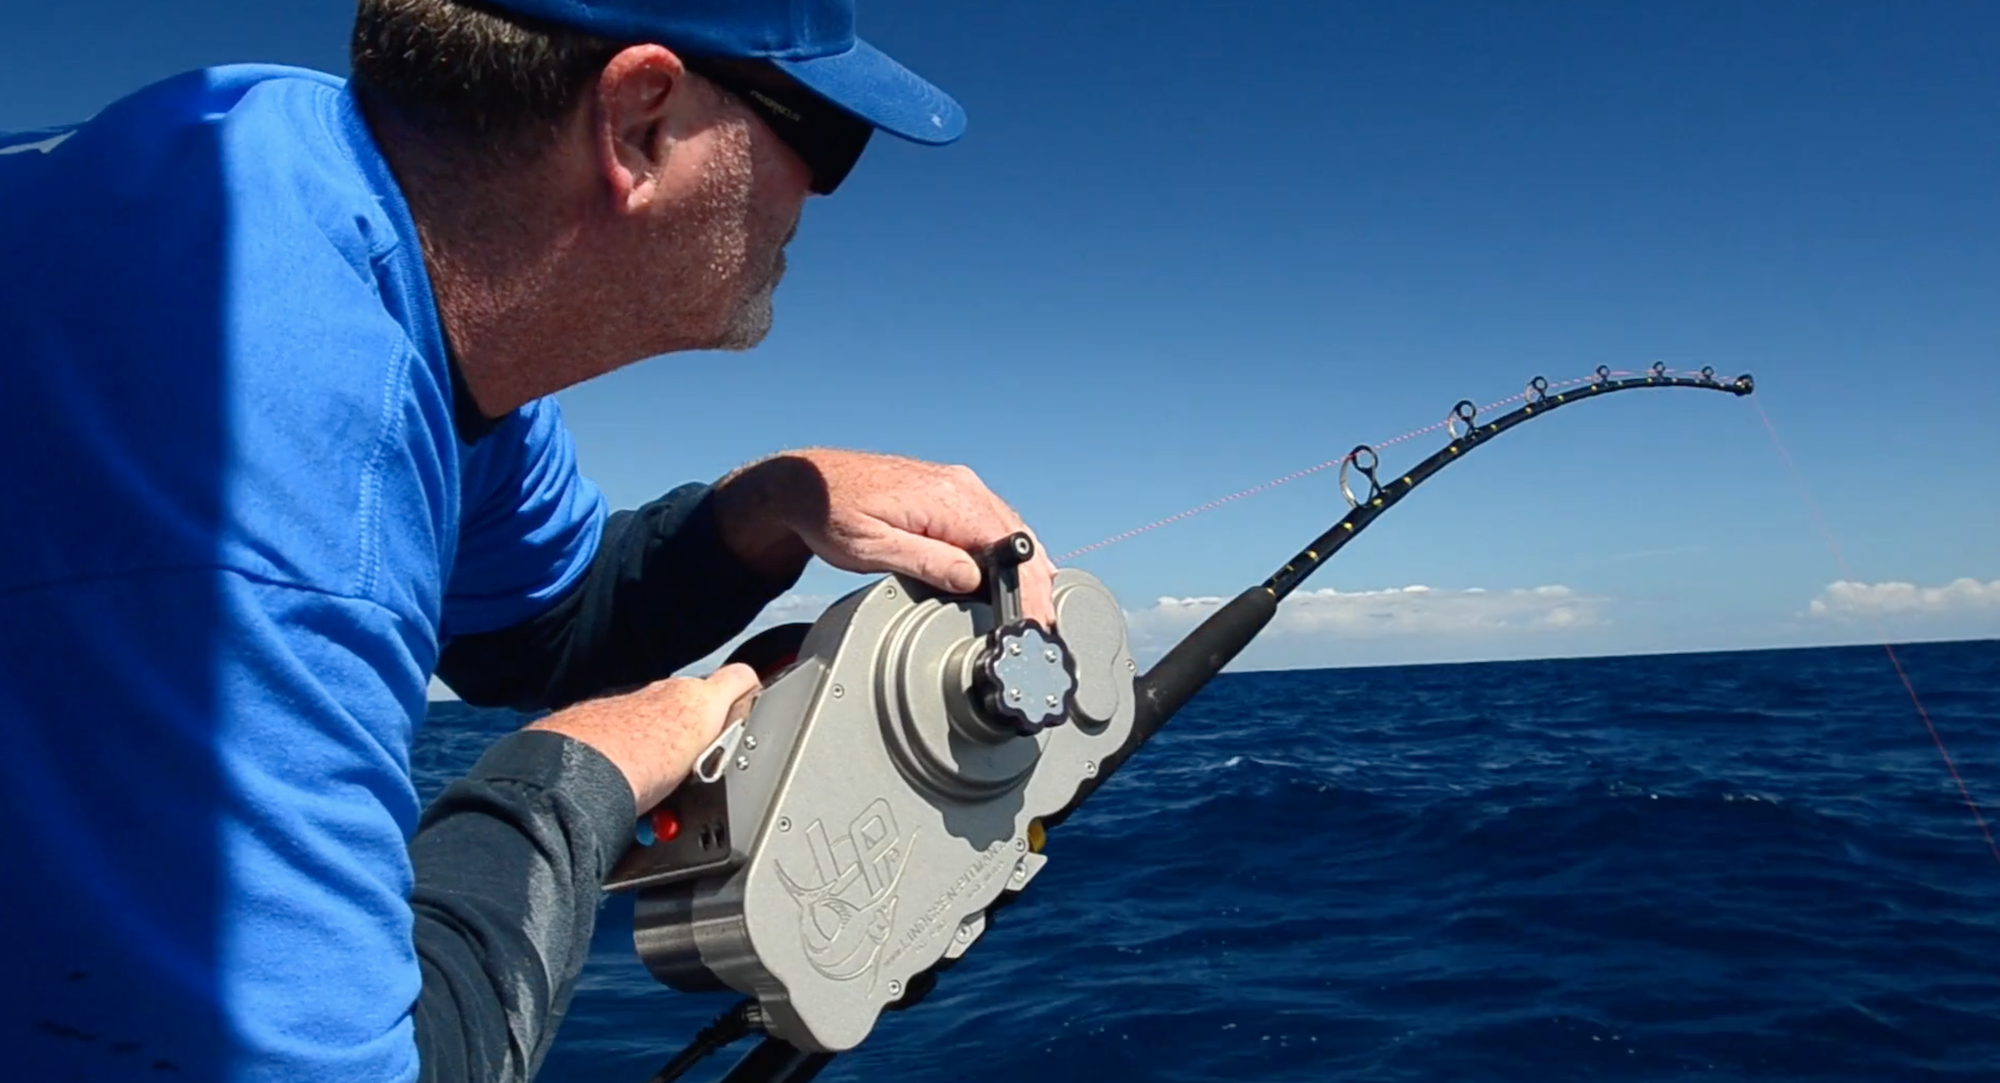 400+ Saltwater Fishing Videos! Learn How To Fish